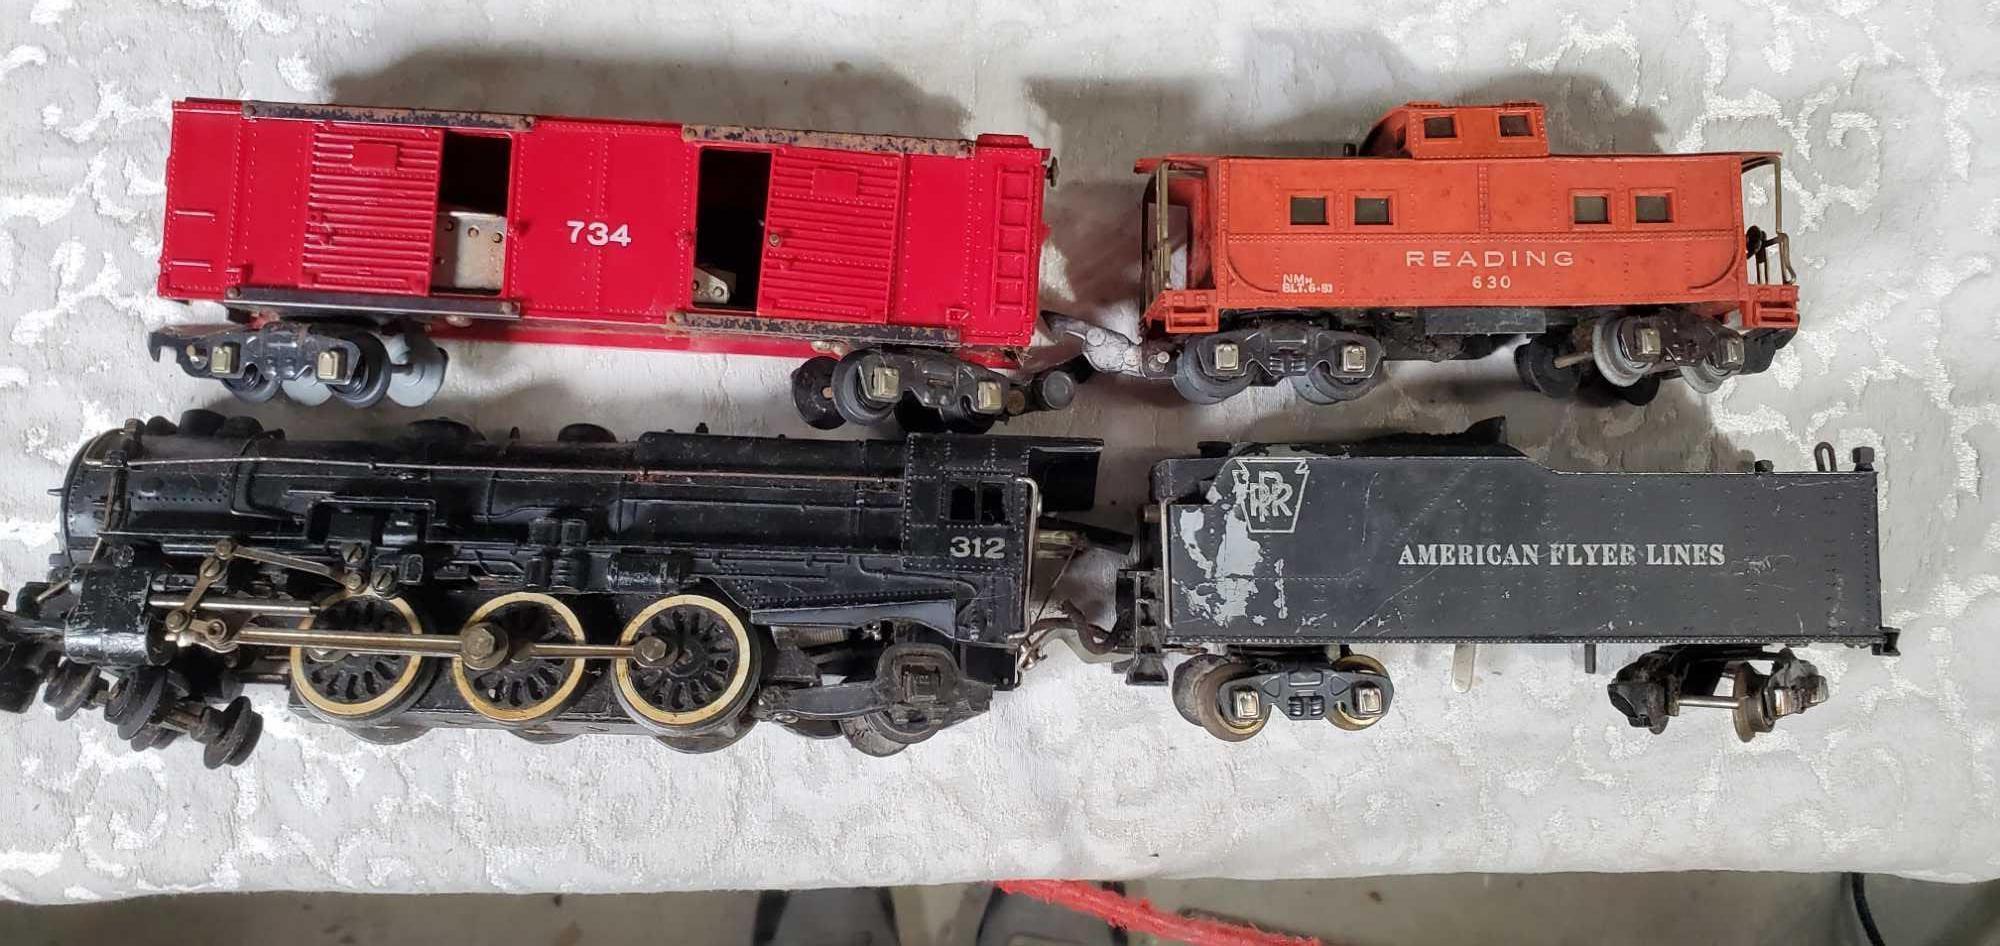 Gilbert/ American Flyer Post War Model Railroad Engines, Cars and Accessories with Some As Is Boxes